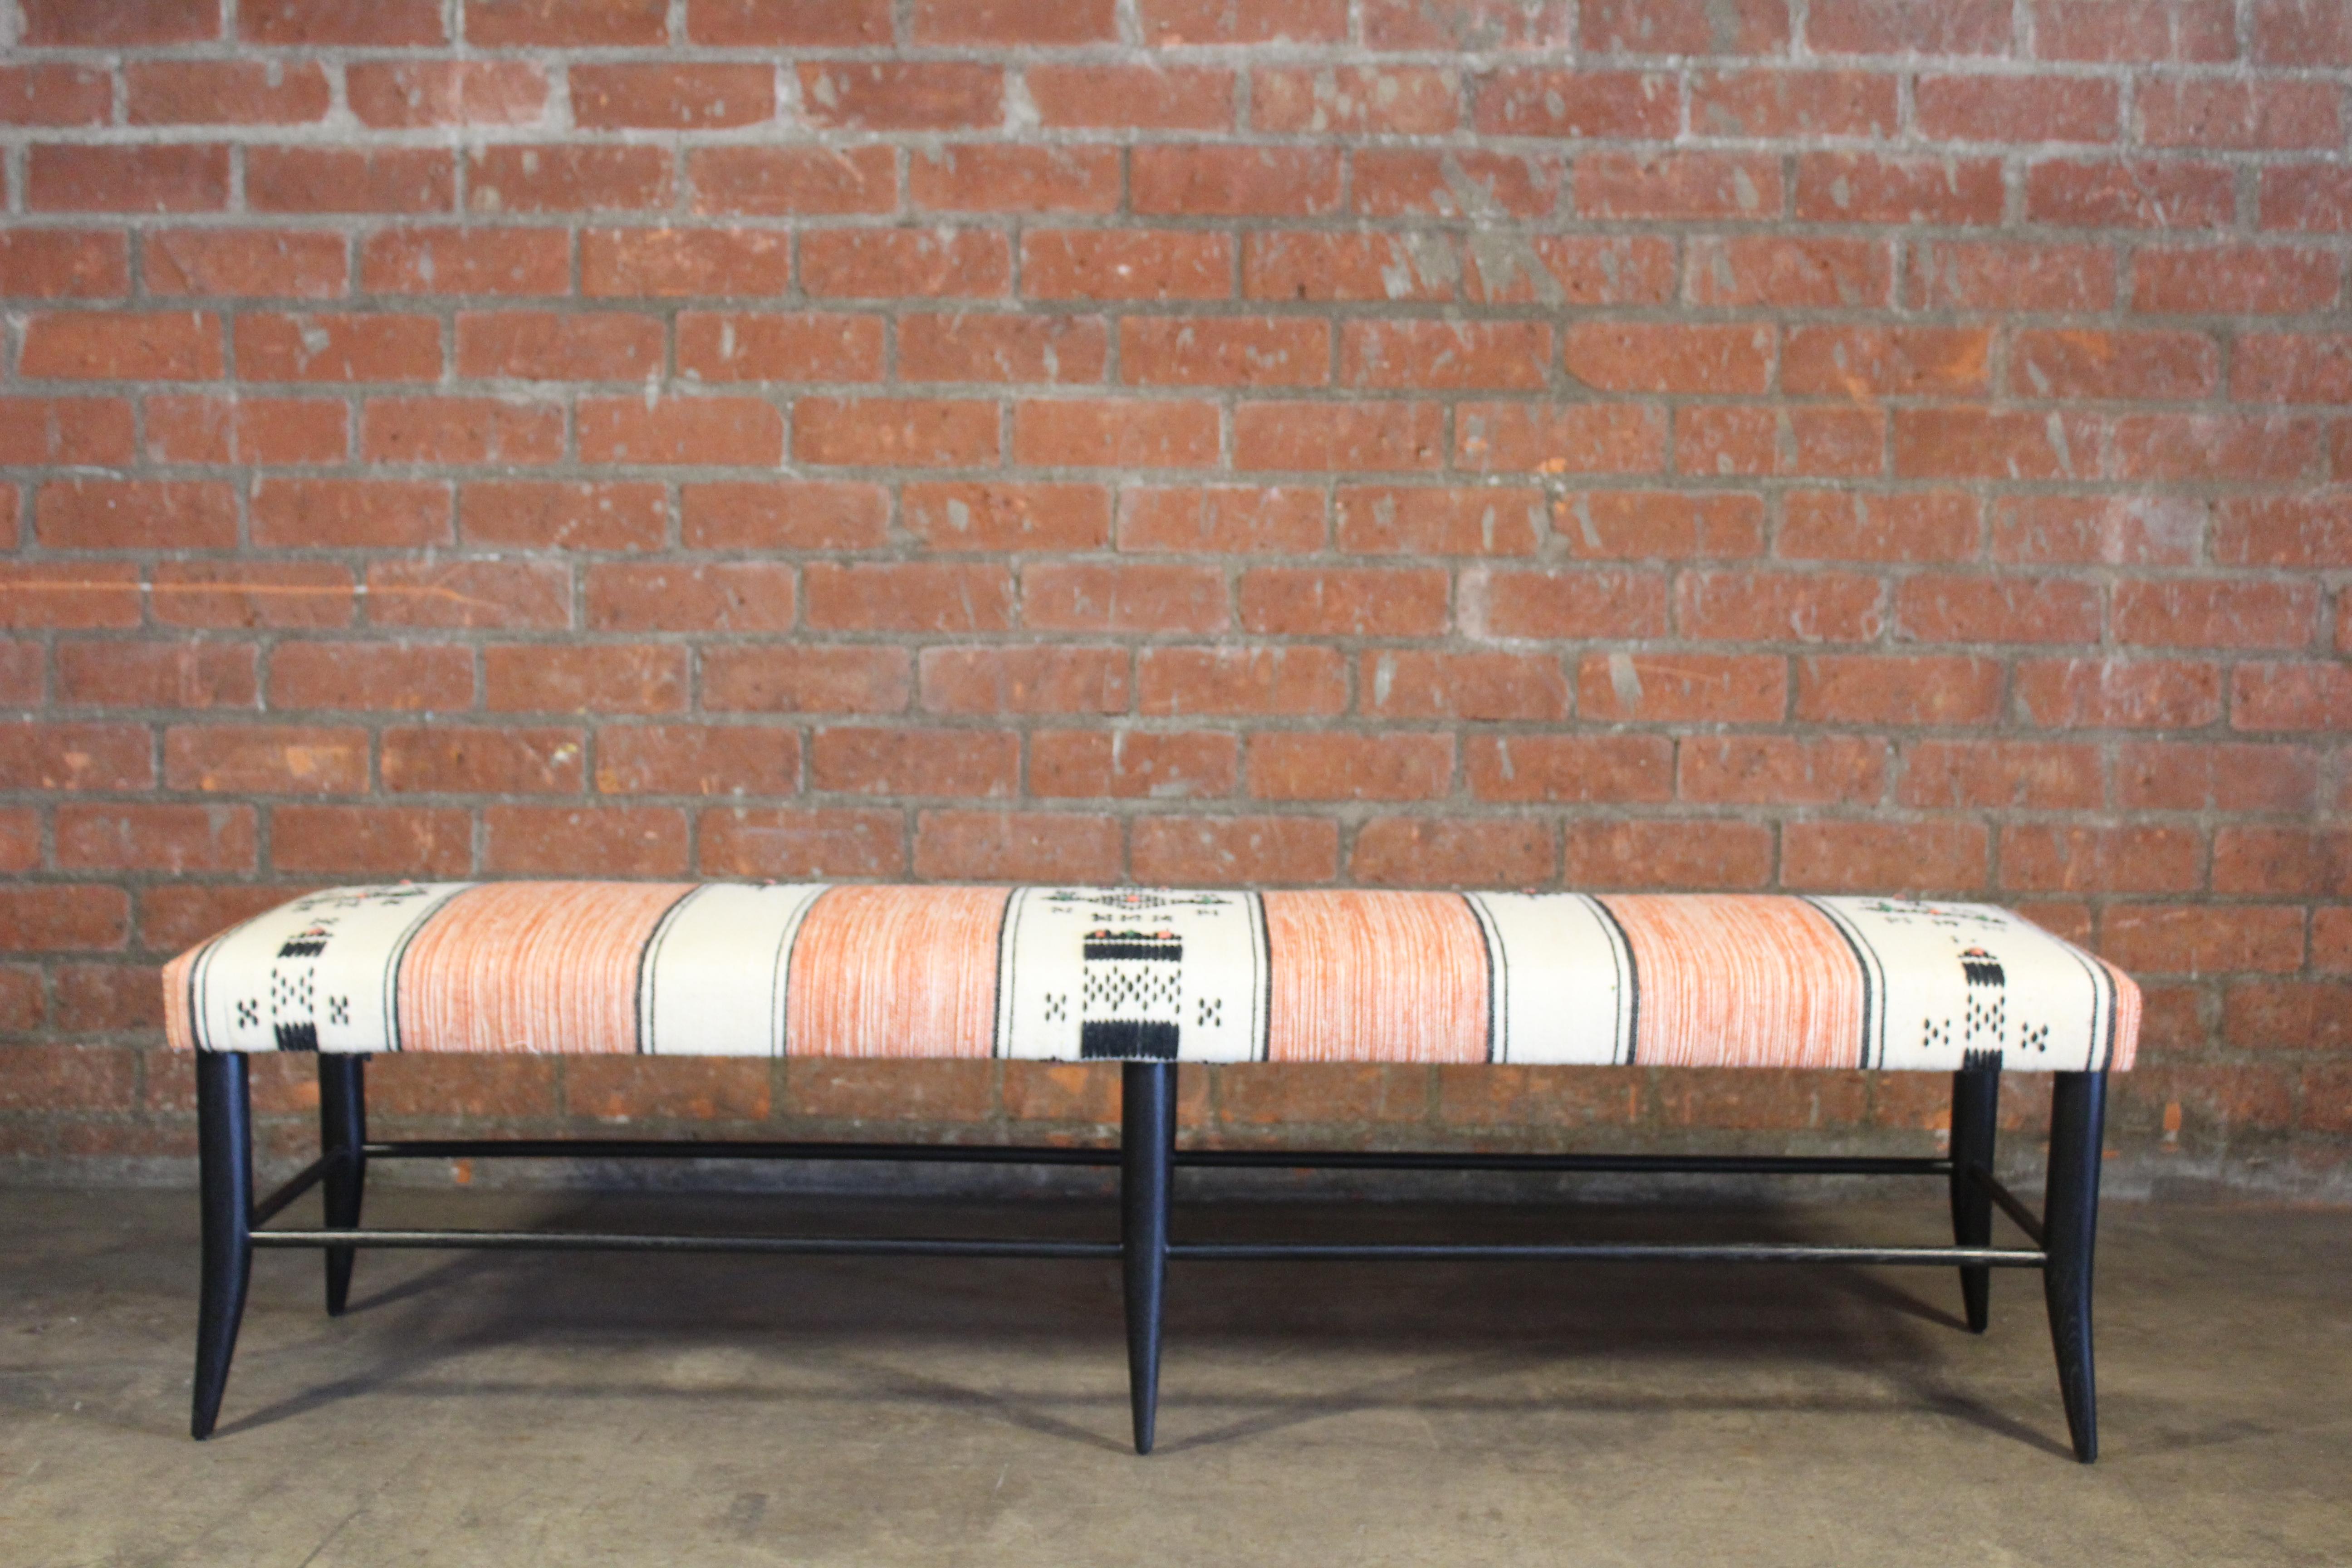 A solid oak handcrafted bench in dark cerused finish- handmade here in Los Angeles. Upholstered in a vintage orange and off-white Moroccan wool textile from the 1970s. In overall excellent condition.